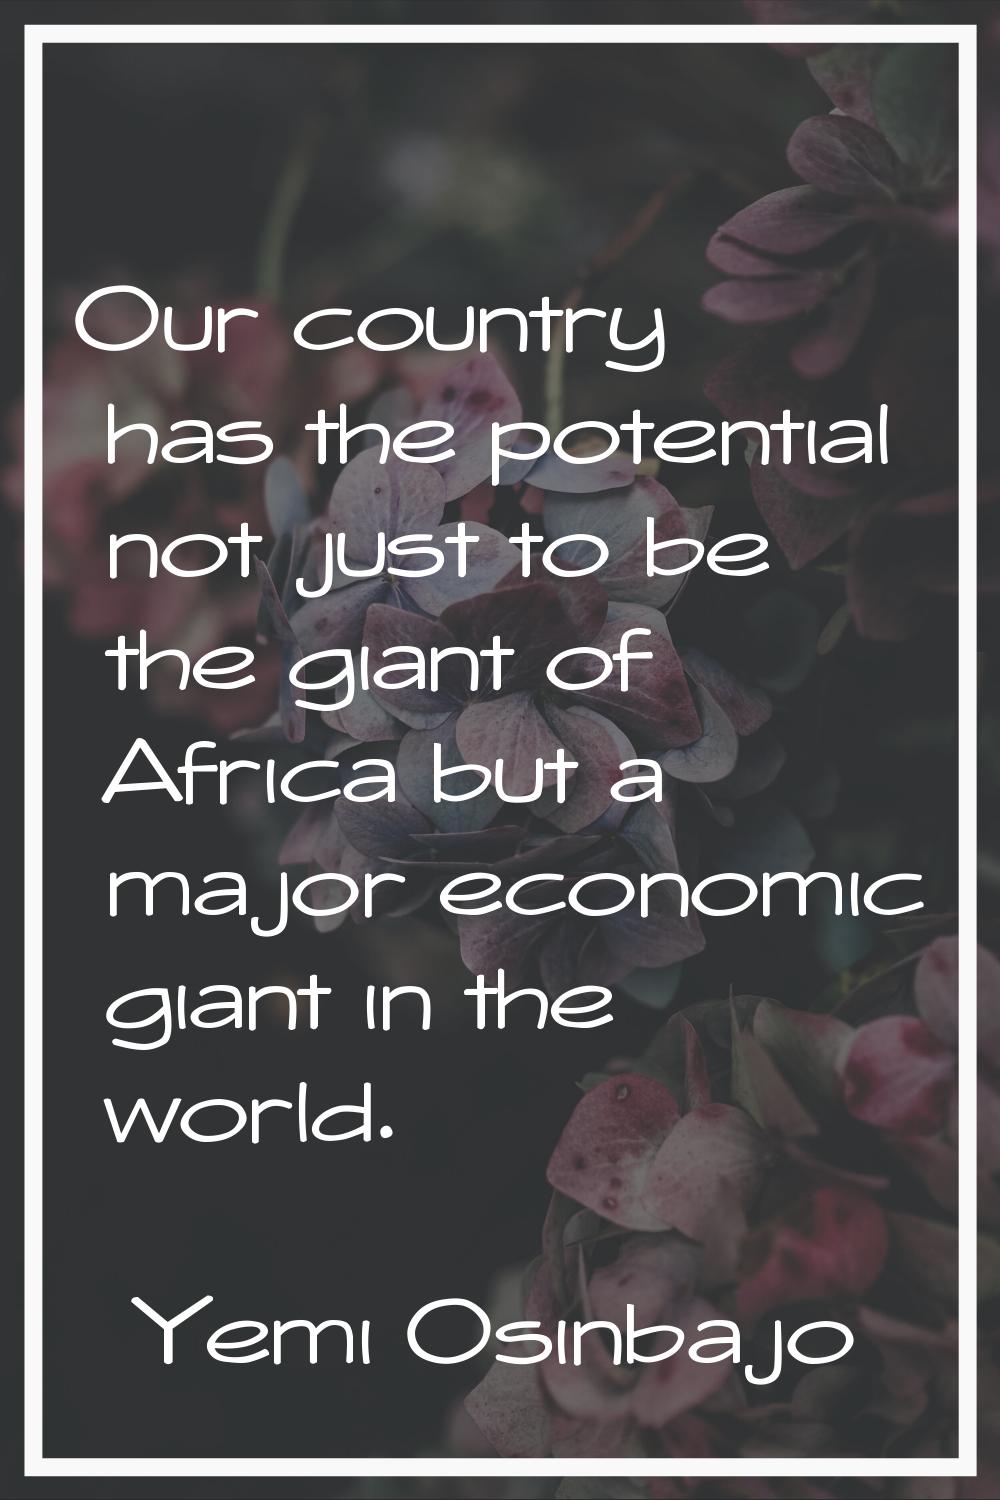 Our country has the potential not just to be the giant of Africa but a major economic giant in the 